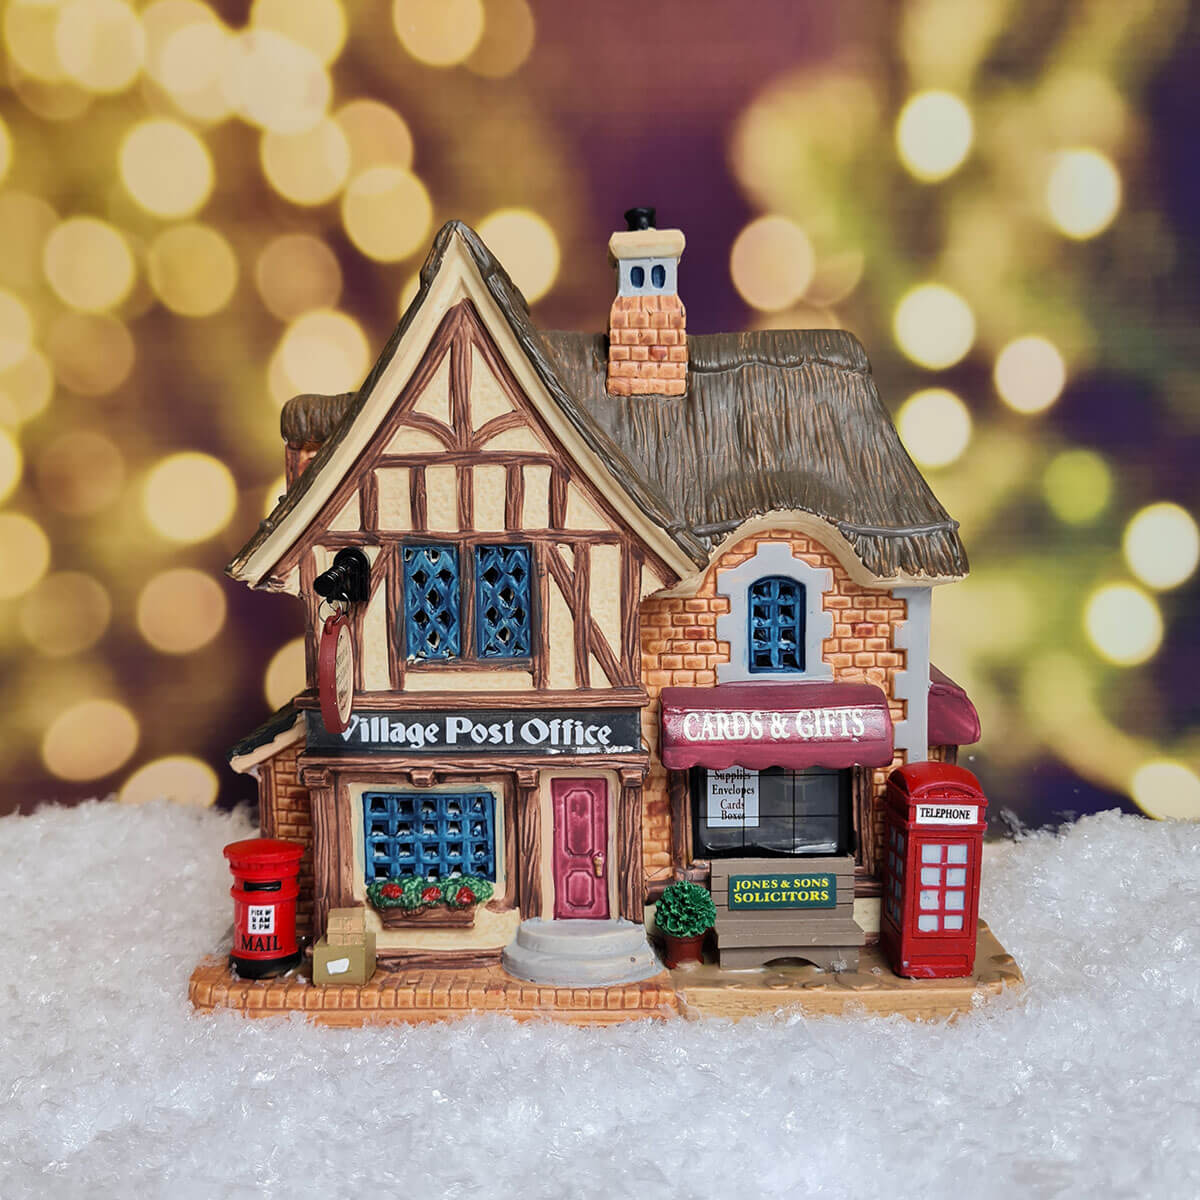 Lemax Christmas Village Post Office